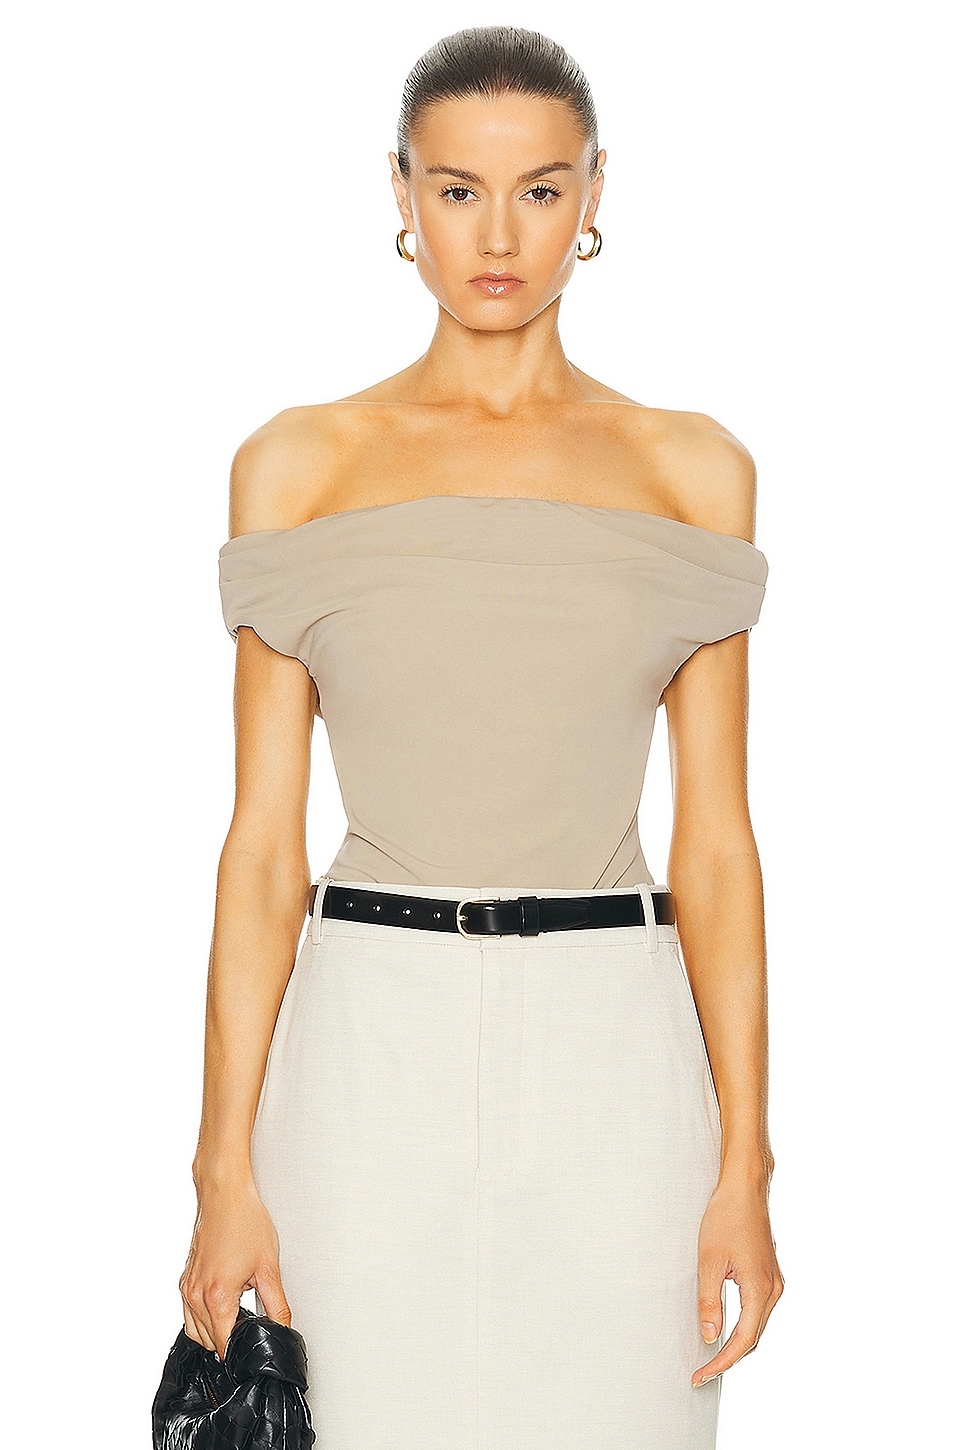 Image 1 of L'Academie by Marianna Fio Top in Beige